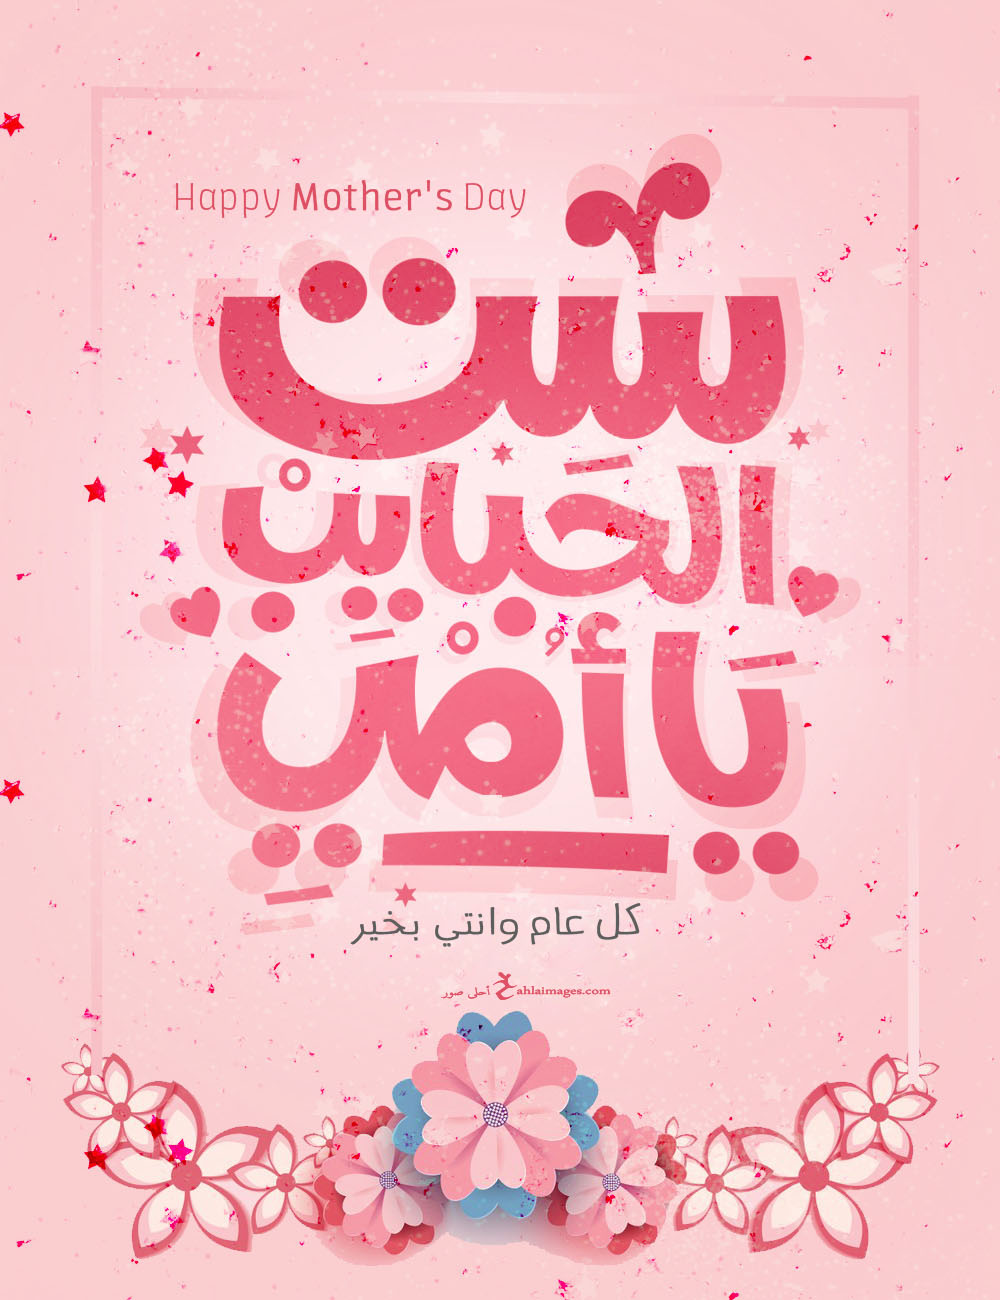 images-mothers-day_1.jpg